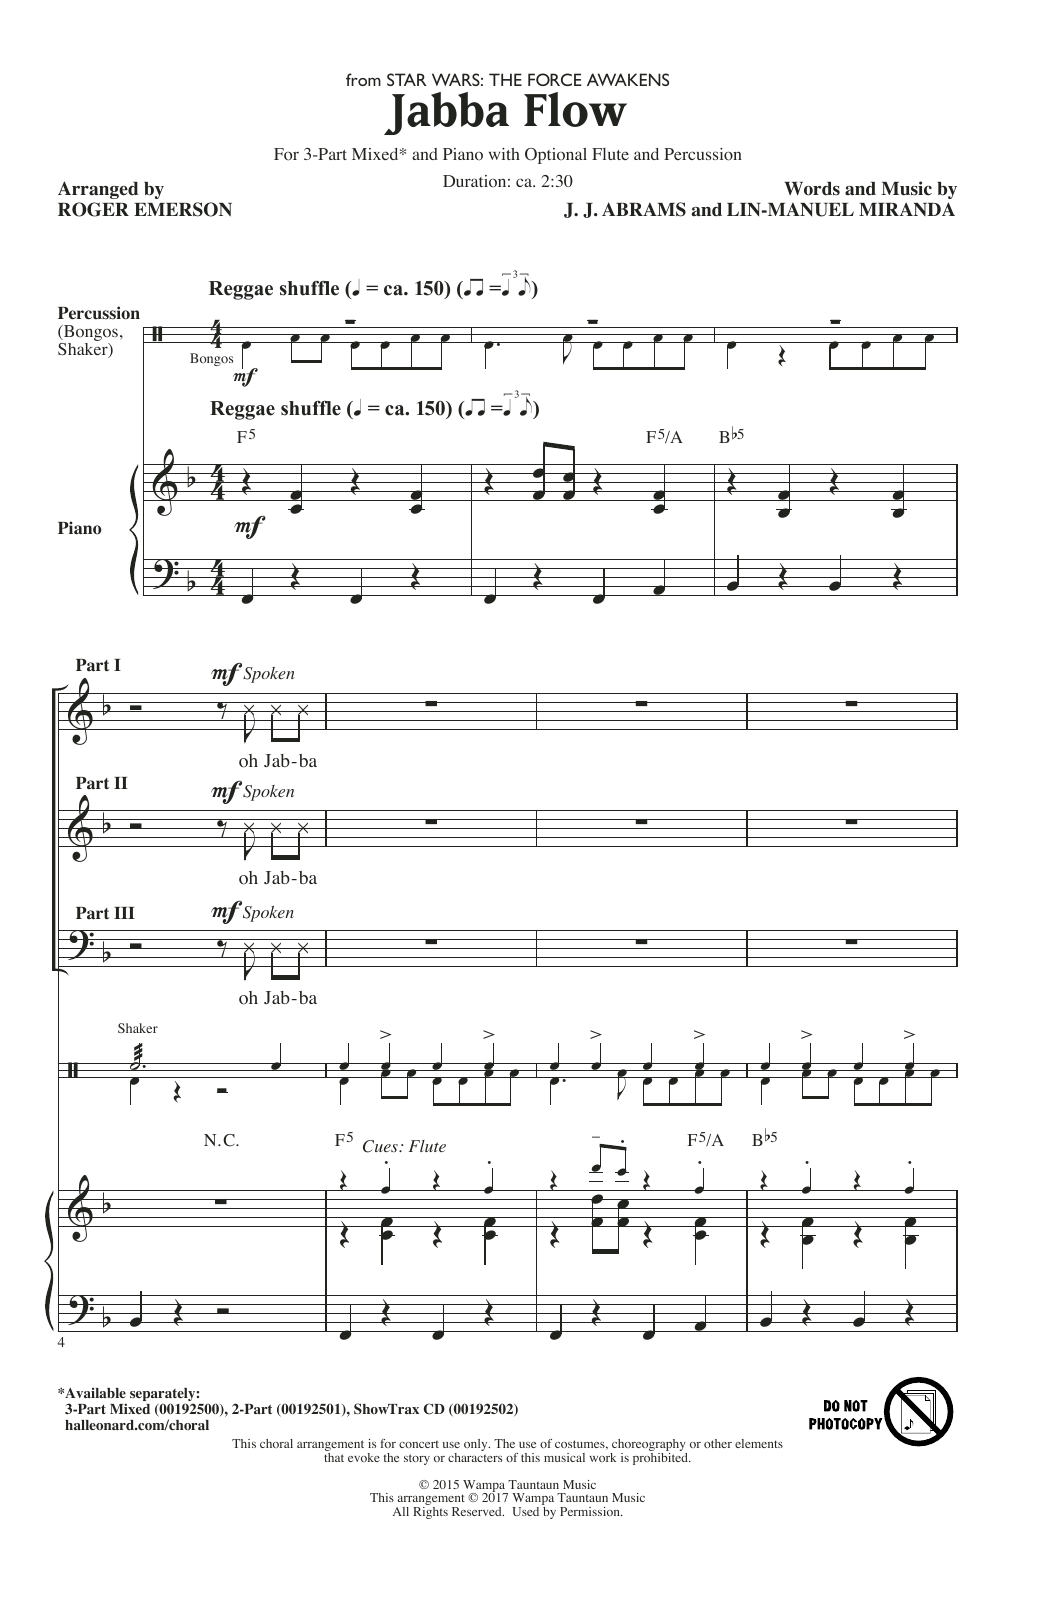 Roger Emerson Jabba Flow (from Star Wars: The Force Awakens) sheet music notes and chords. Download Printable PDF.